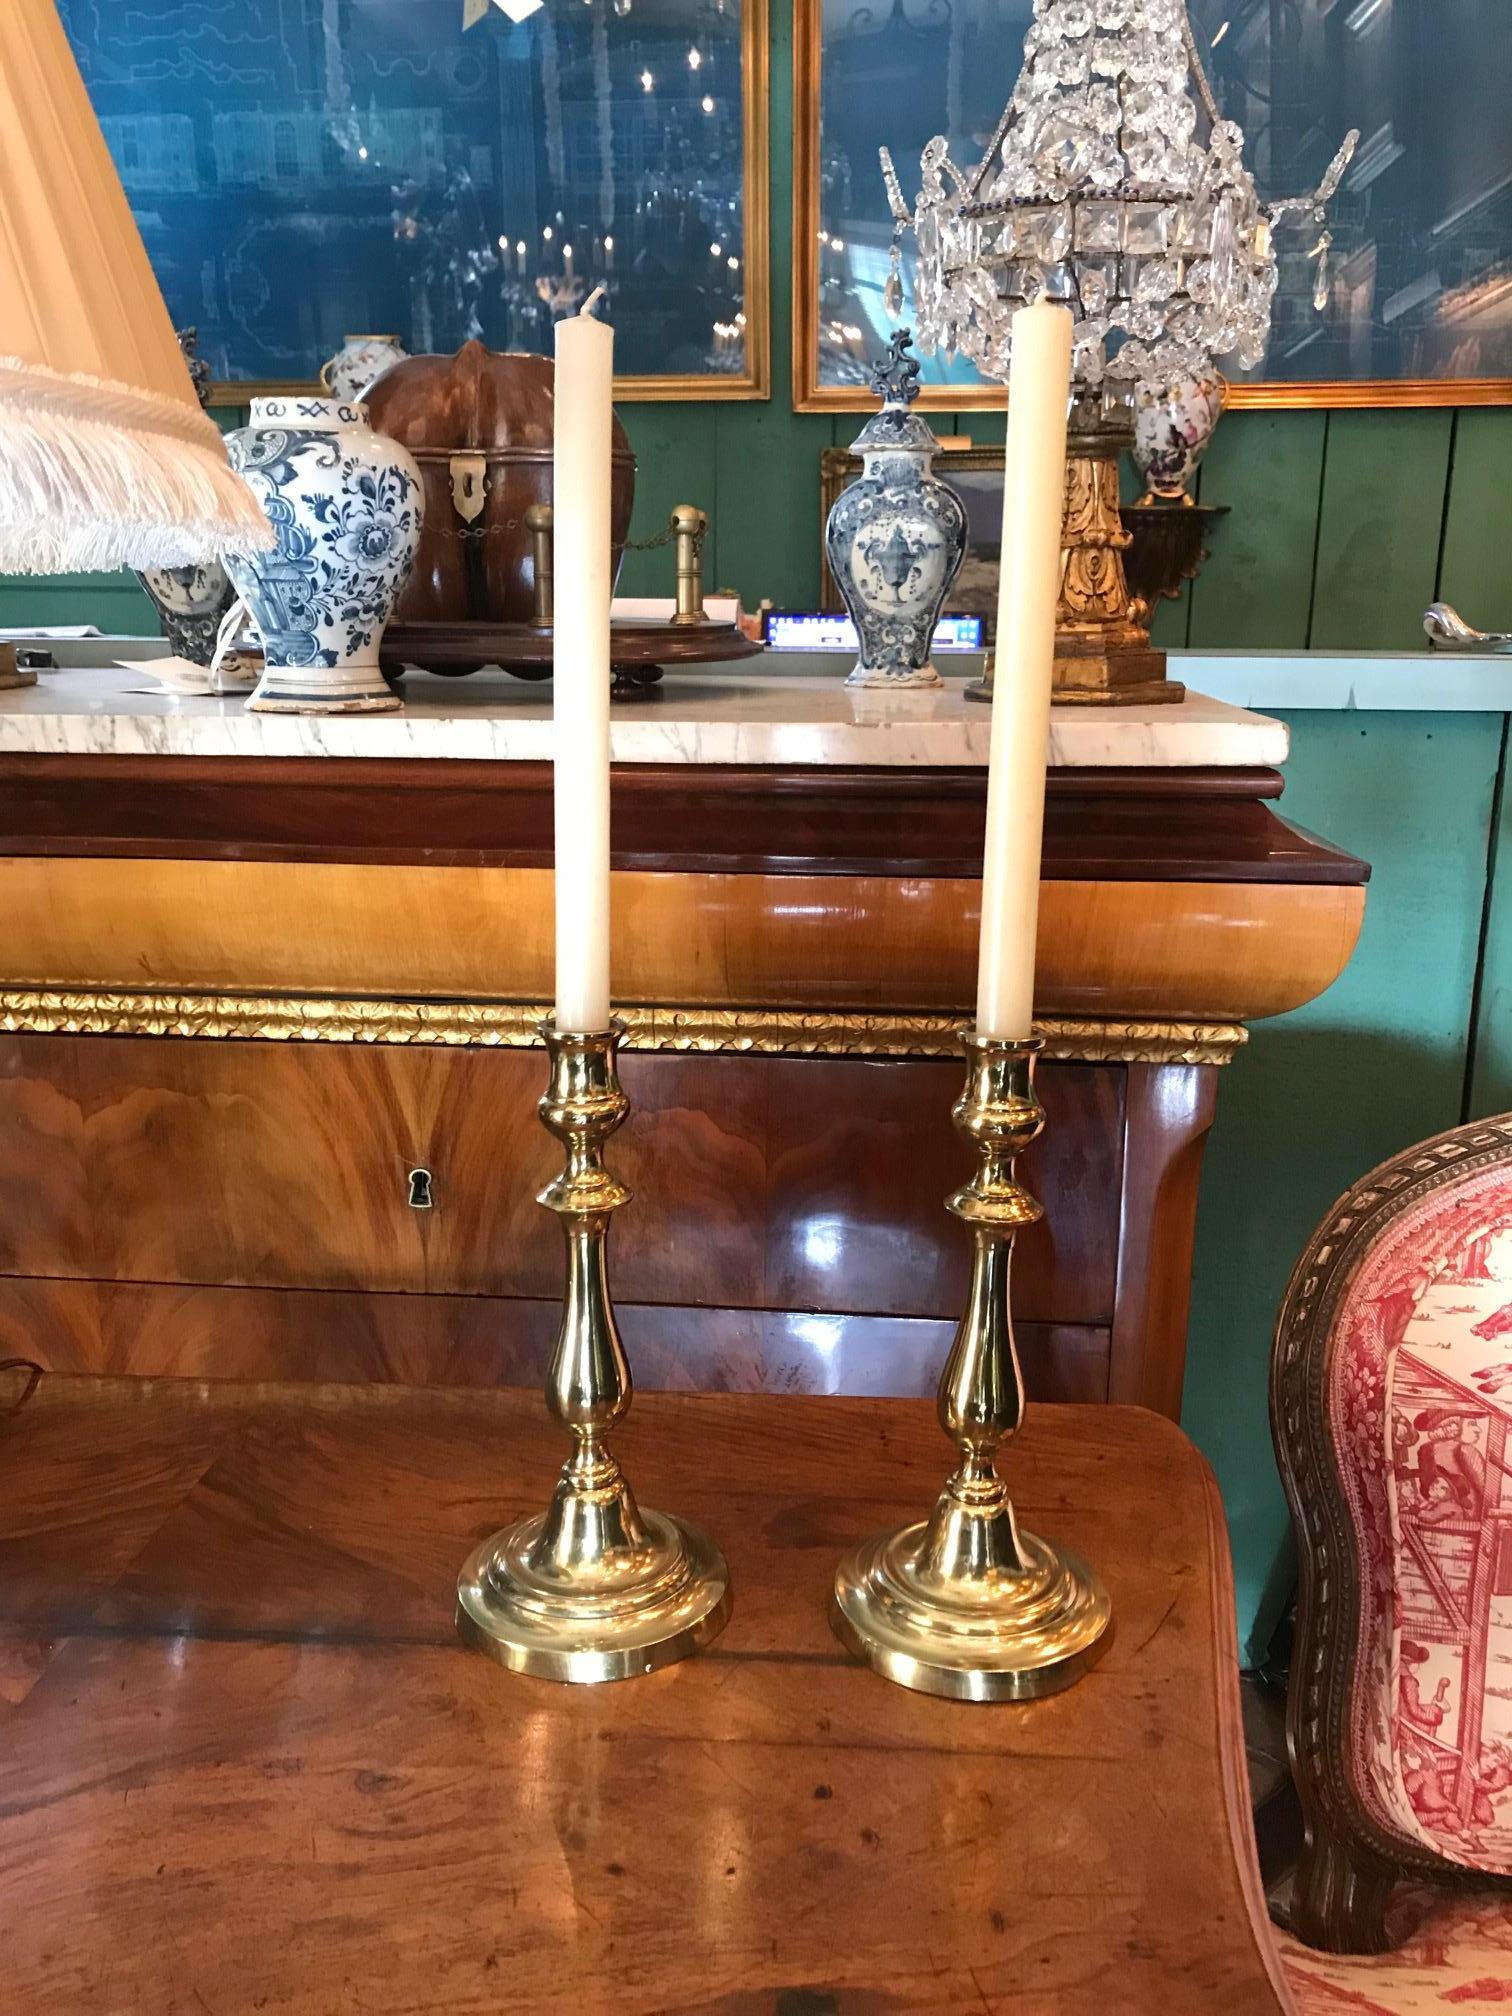 Pair Candlesticks Candleholder Light in Brass Antique Object Decorative Accent . A very beautiful simple pair of late 19th-early 20th century candleholders candlesticks in brass. The mirroring Work with the multiple layers and lines from the bobeche